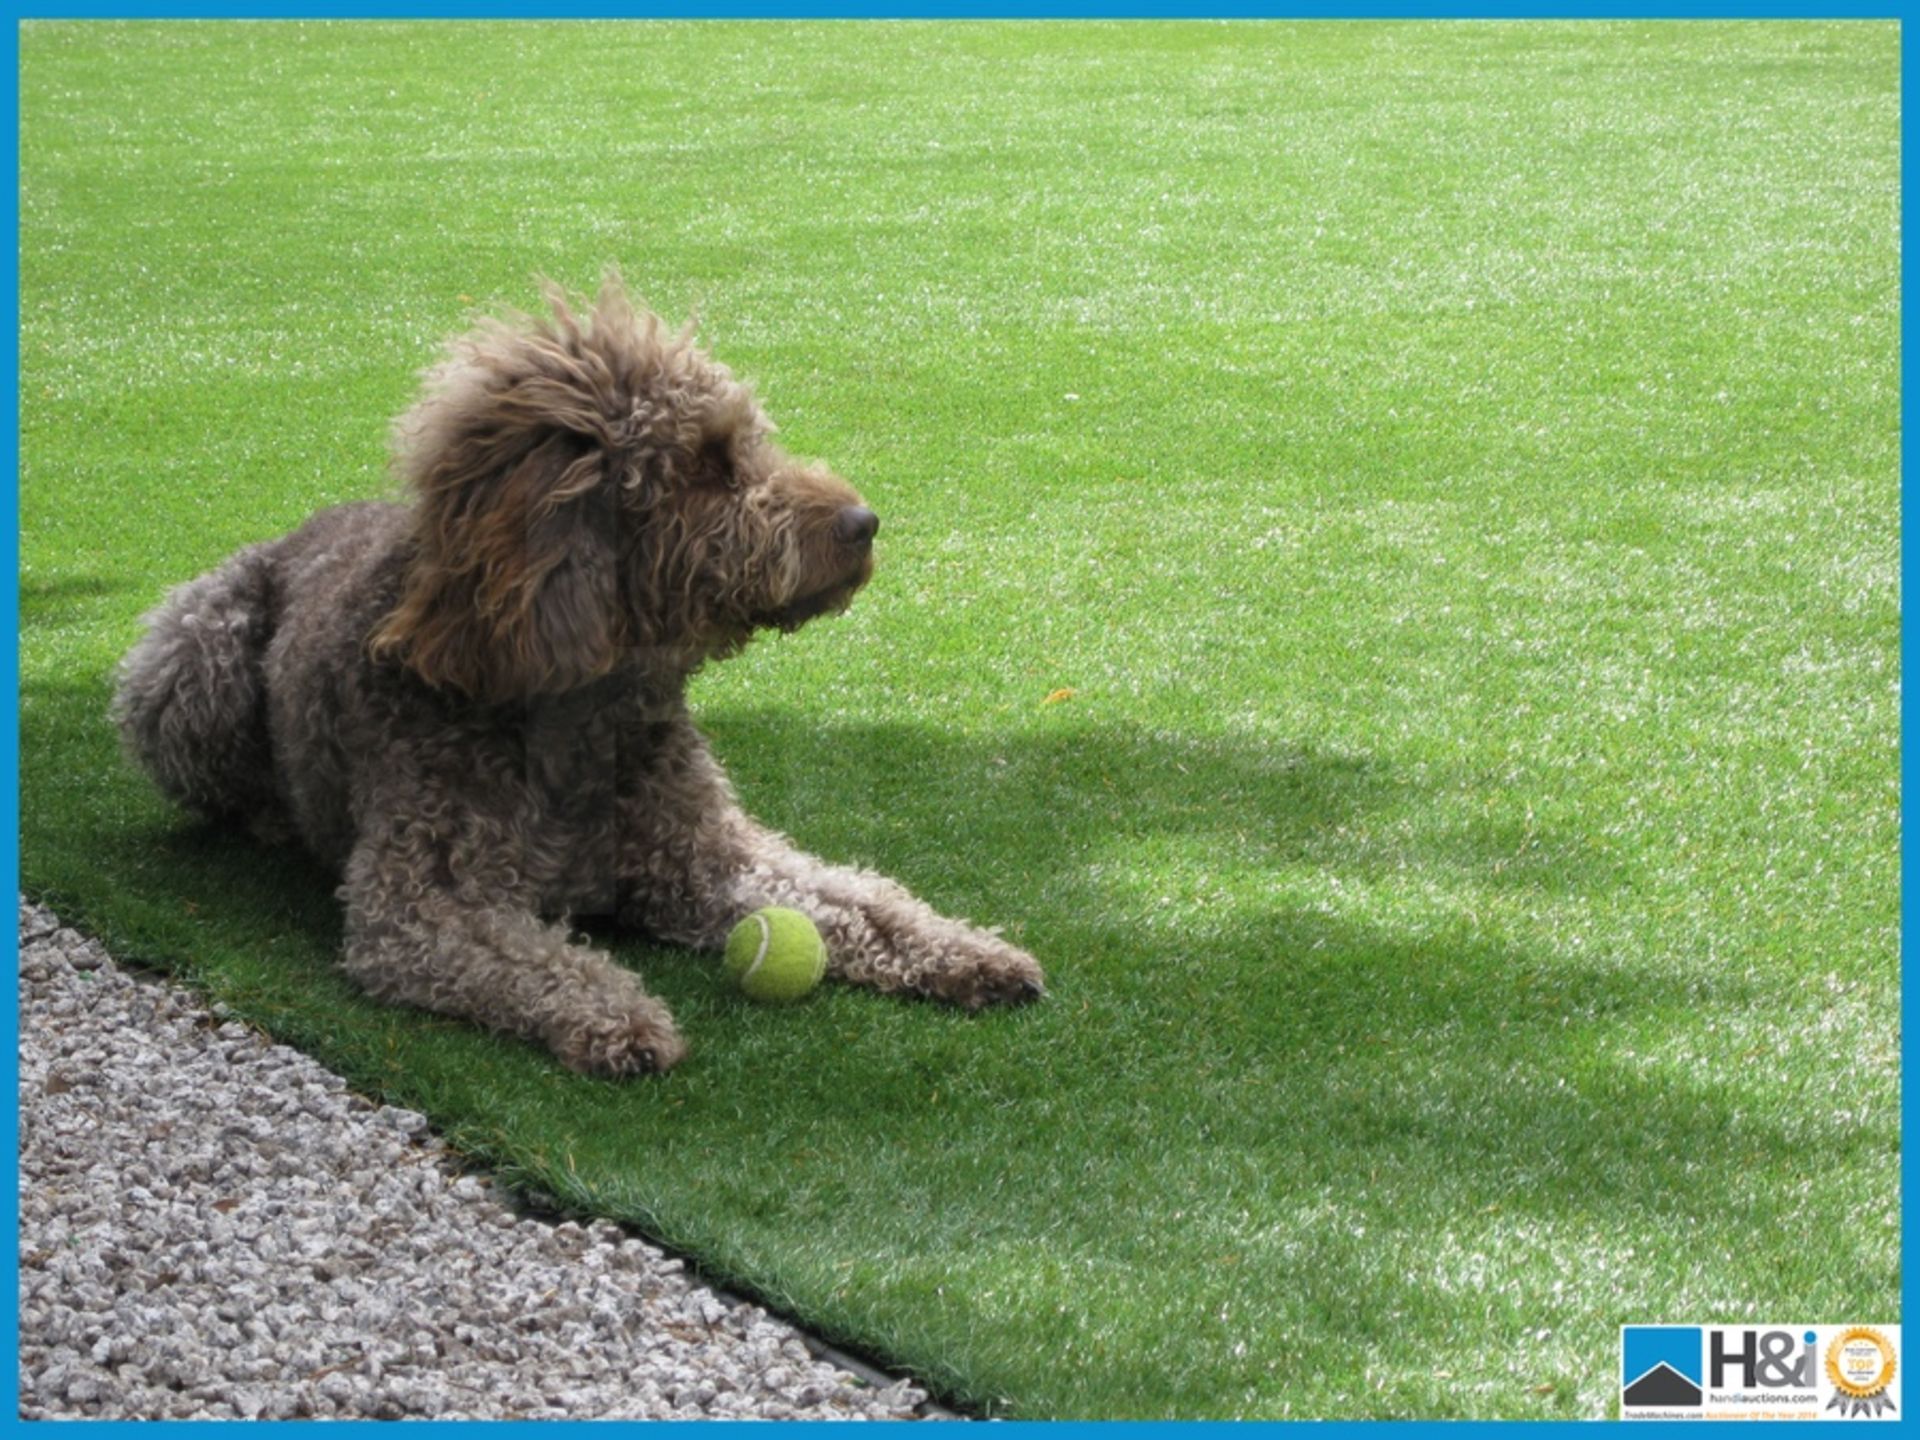 Ultra high-quality 'Woodthorpe' artificial grass. Useage applications, commercial and domestic, - Image 3 of 4